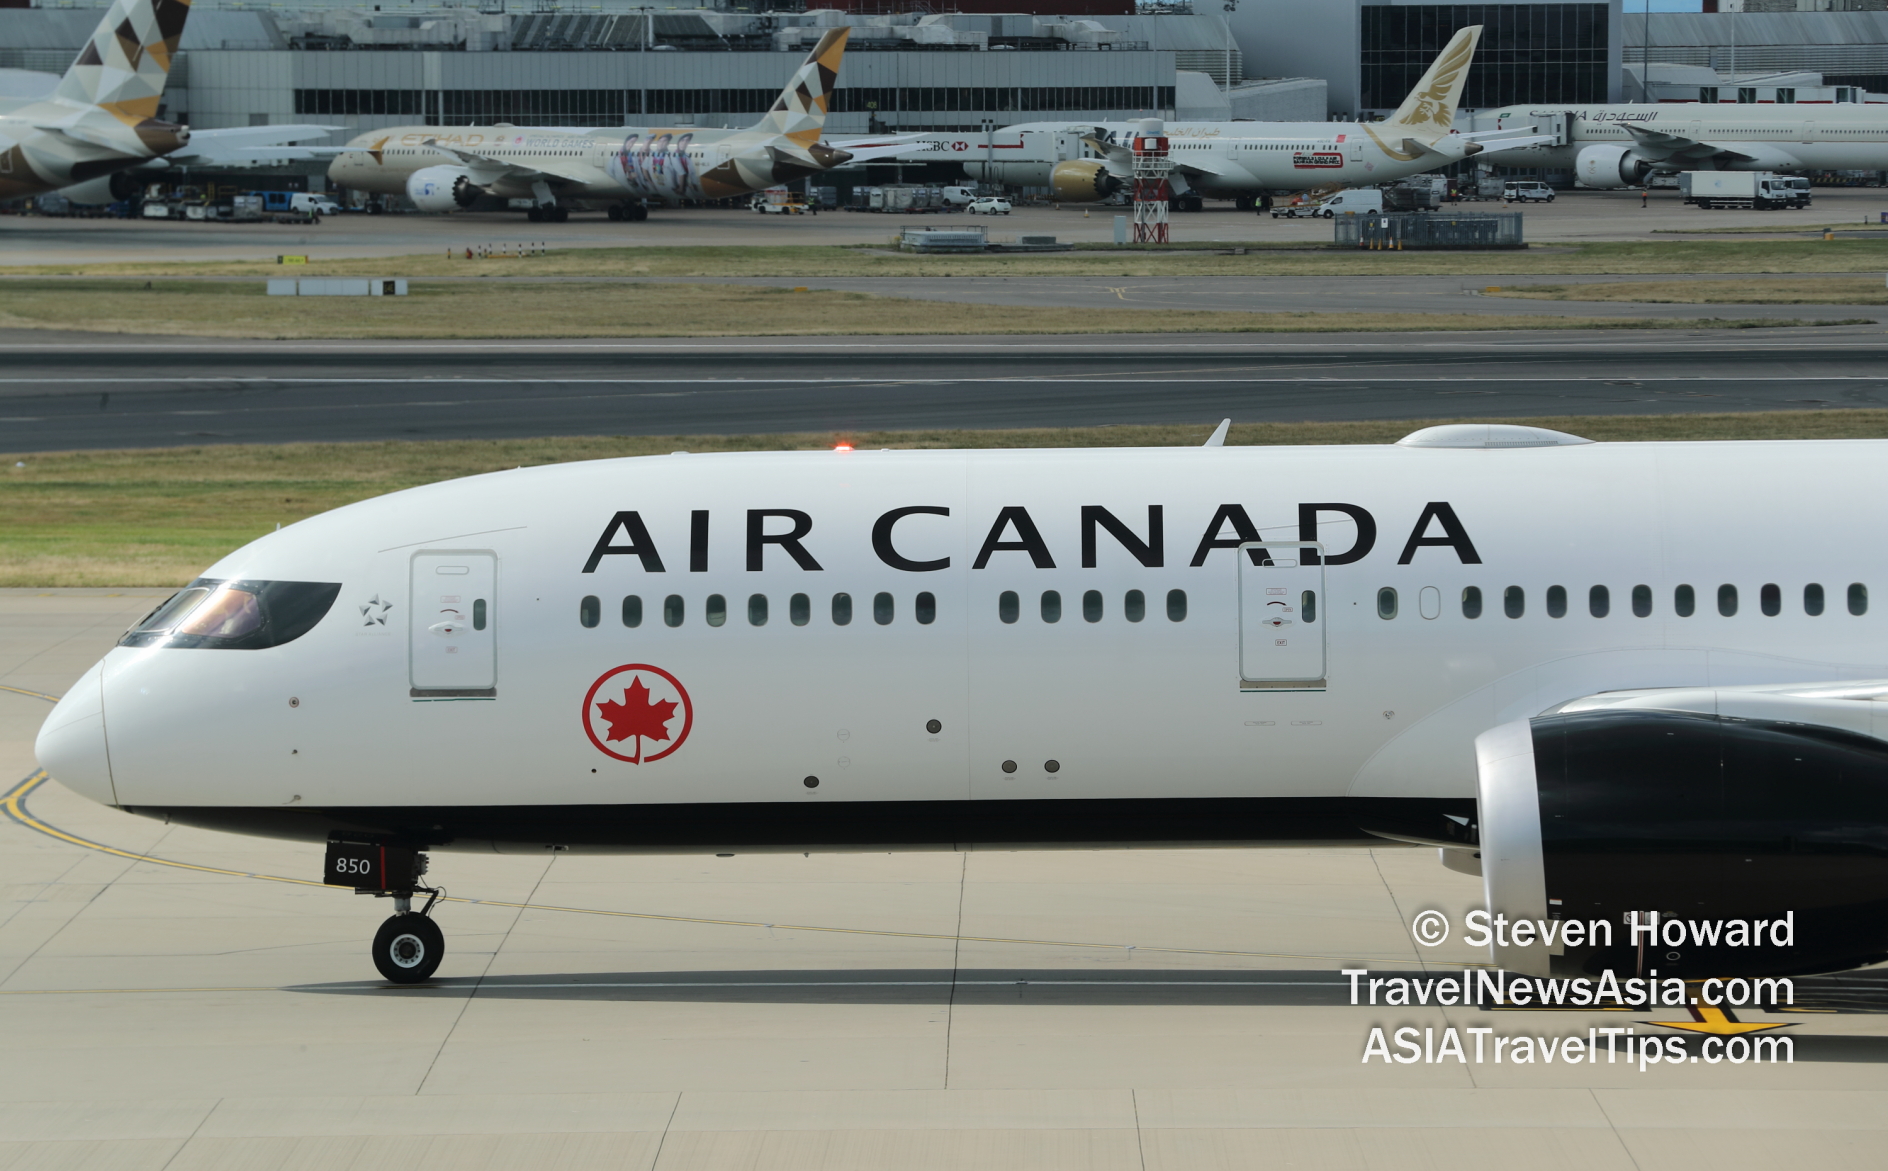 Air Canada B787-8 reg: C-FRTU. Picture by Steven Howard of TravelNewsAsia.com Click to enlarge.